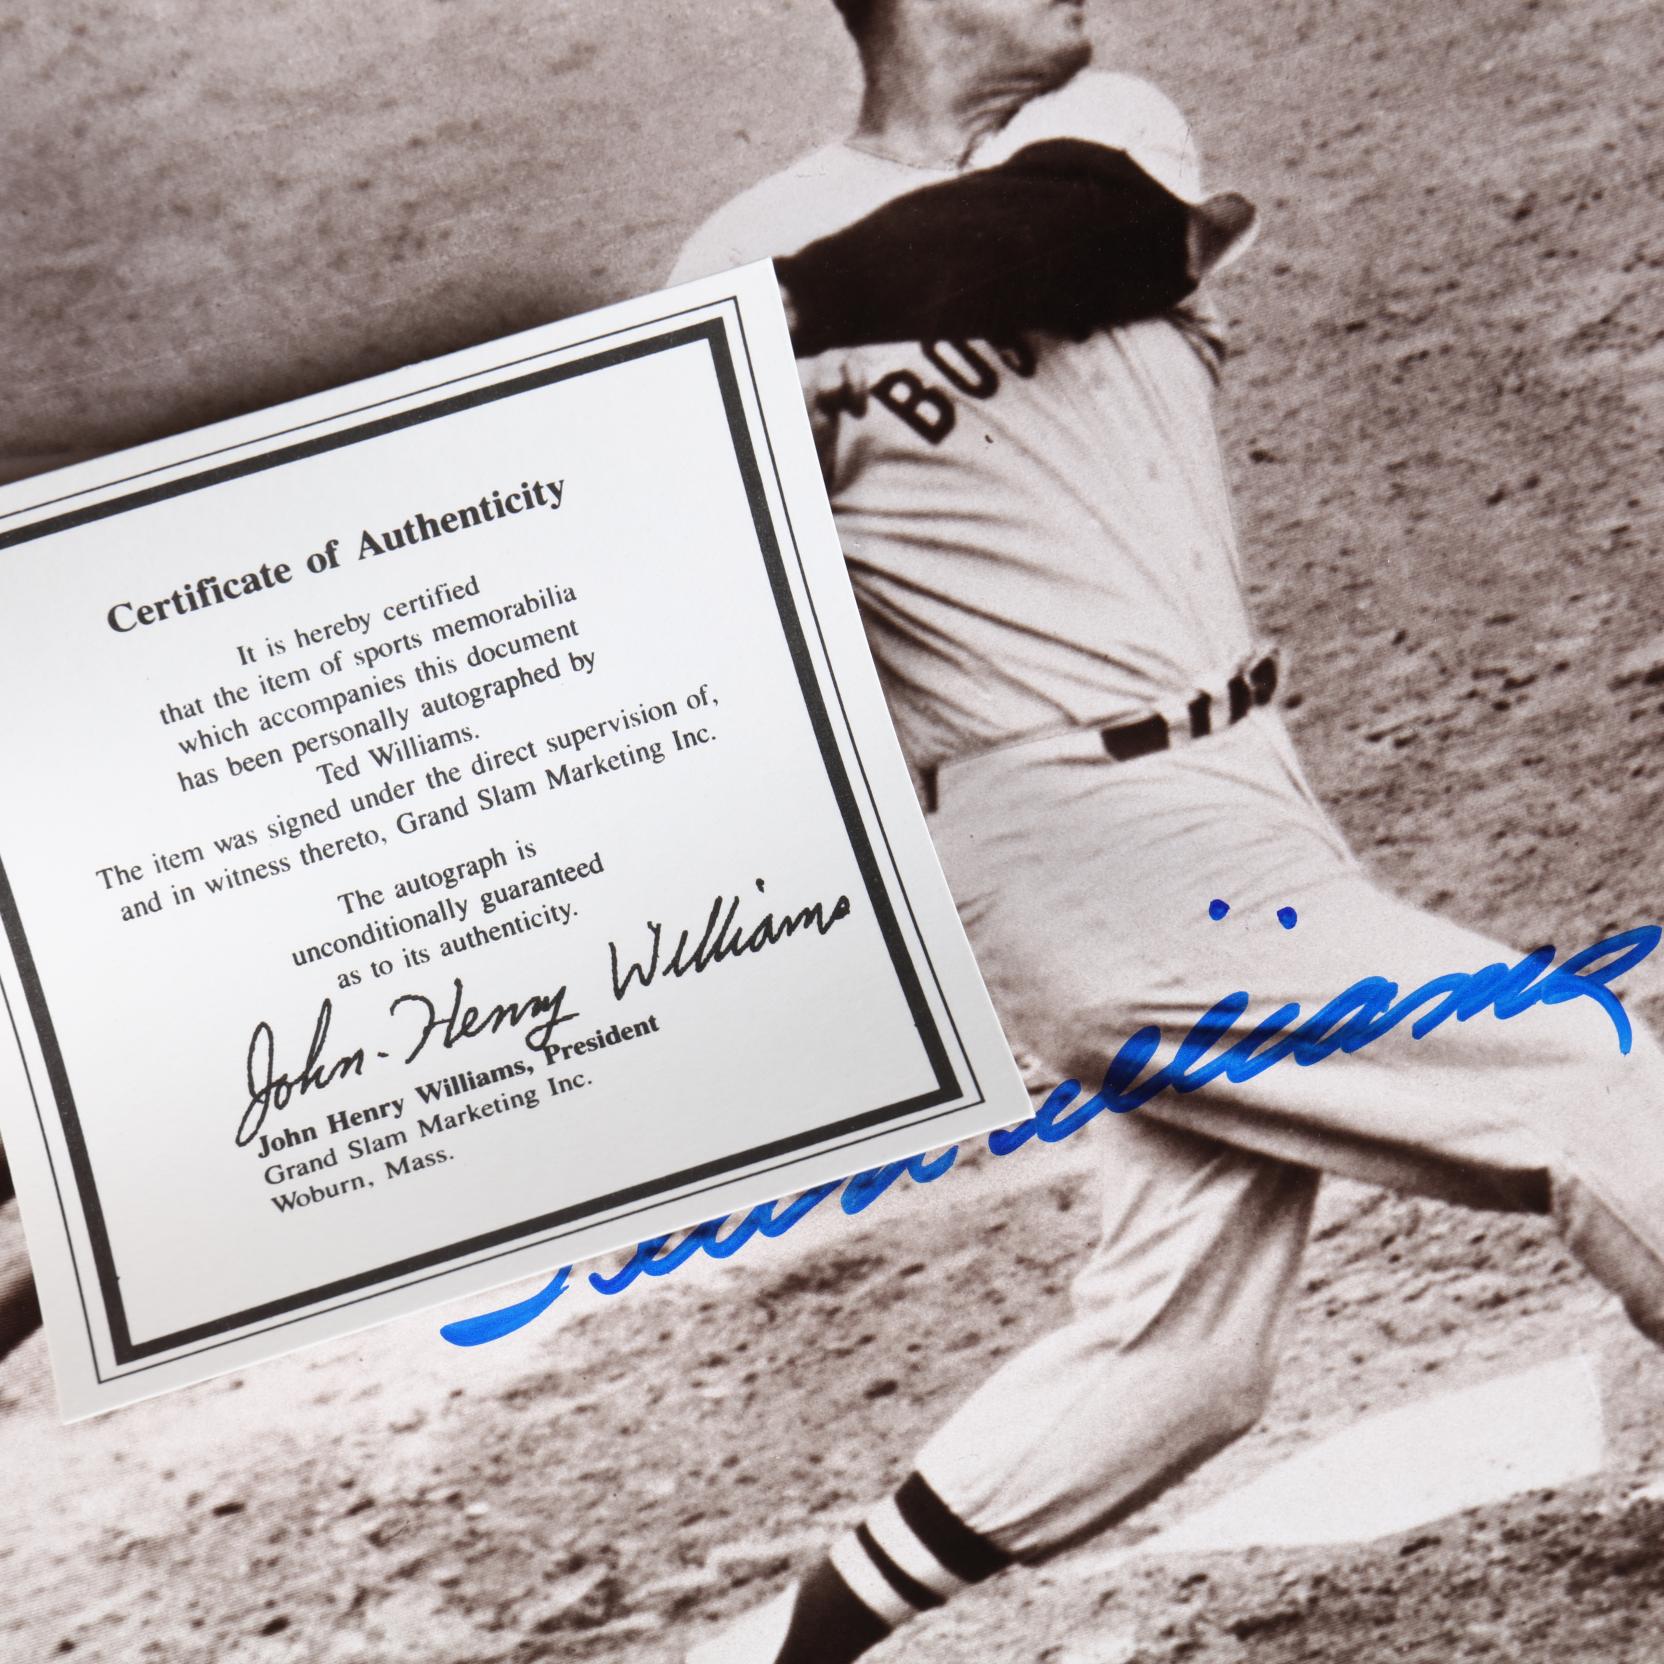 Ted Williams Signed Photograph with COA (Lot 1024 - Single-Owner Sports  Memorabilia CollectionOct 26, 2018, 1:00pm)